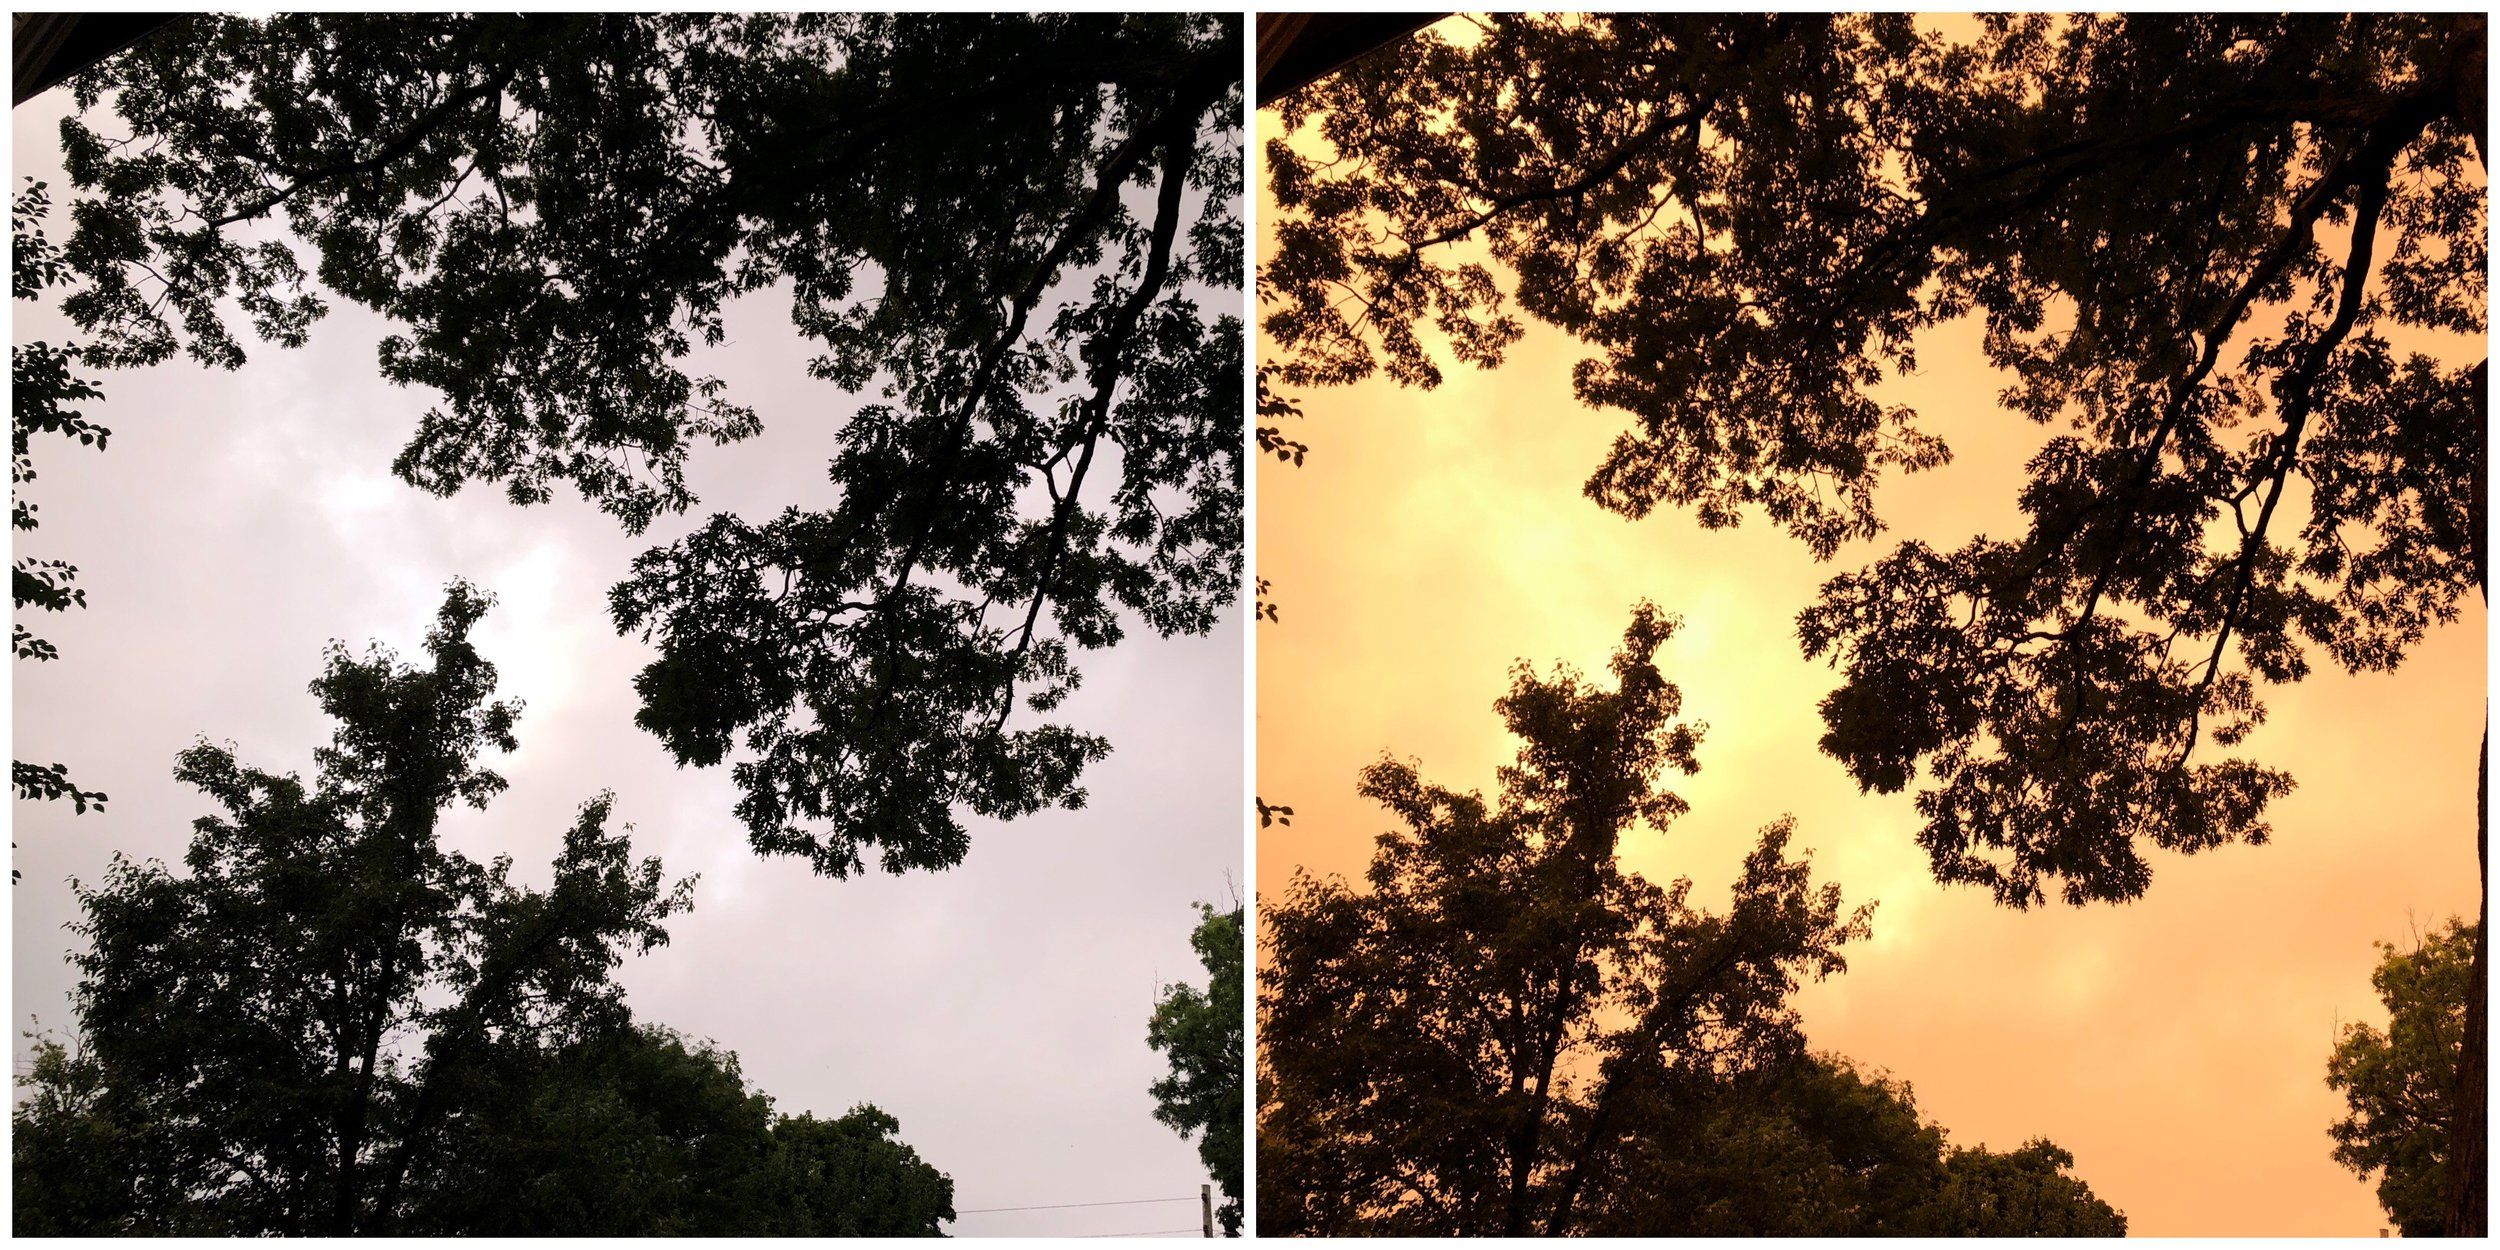 The camera’s auto white balance (left) compared to what the sky looked like with adjusted white balance (right).